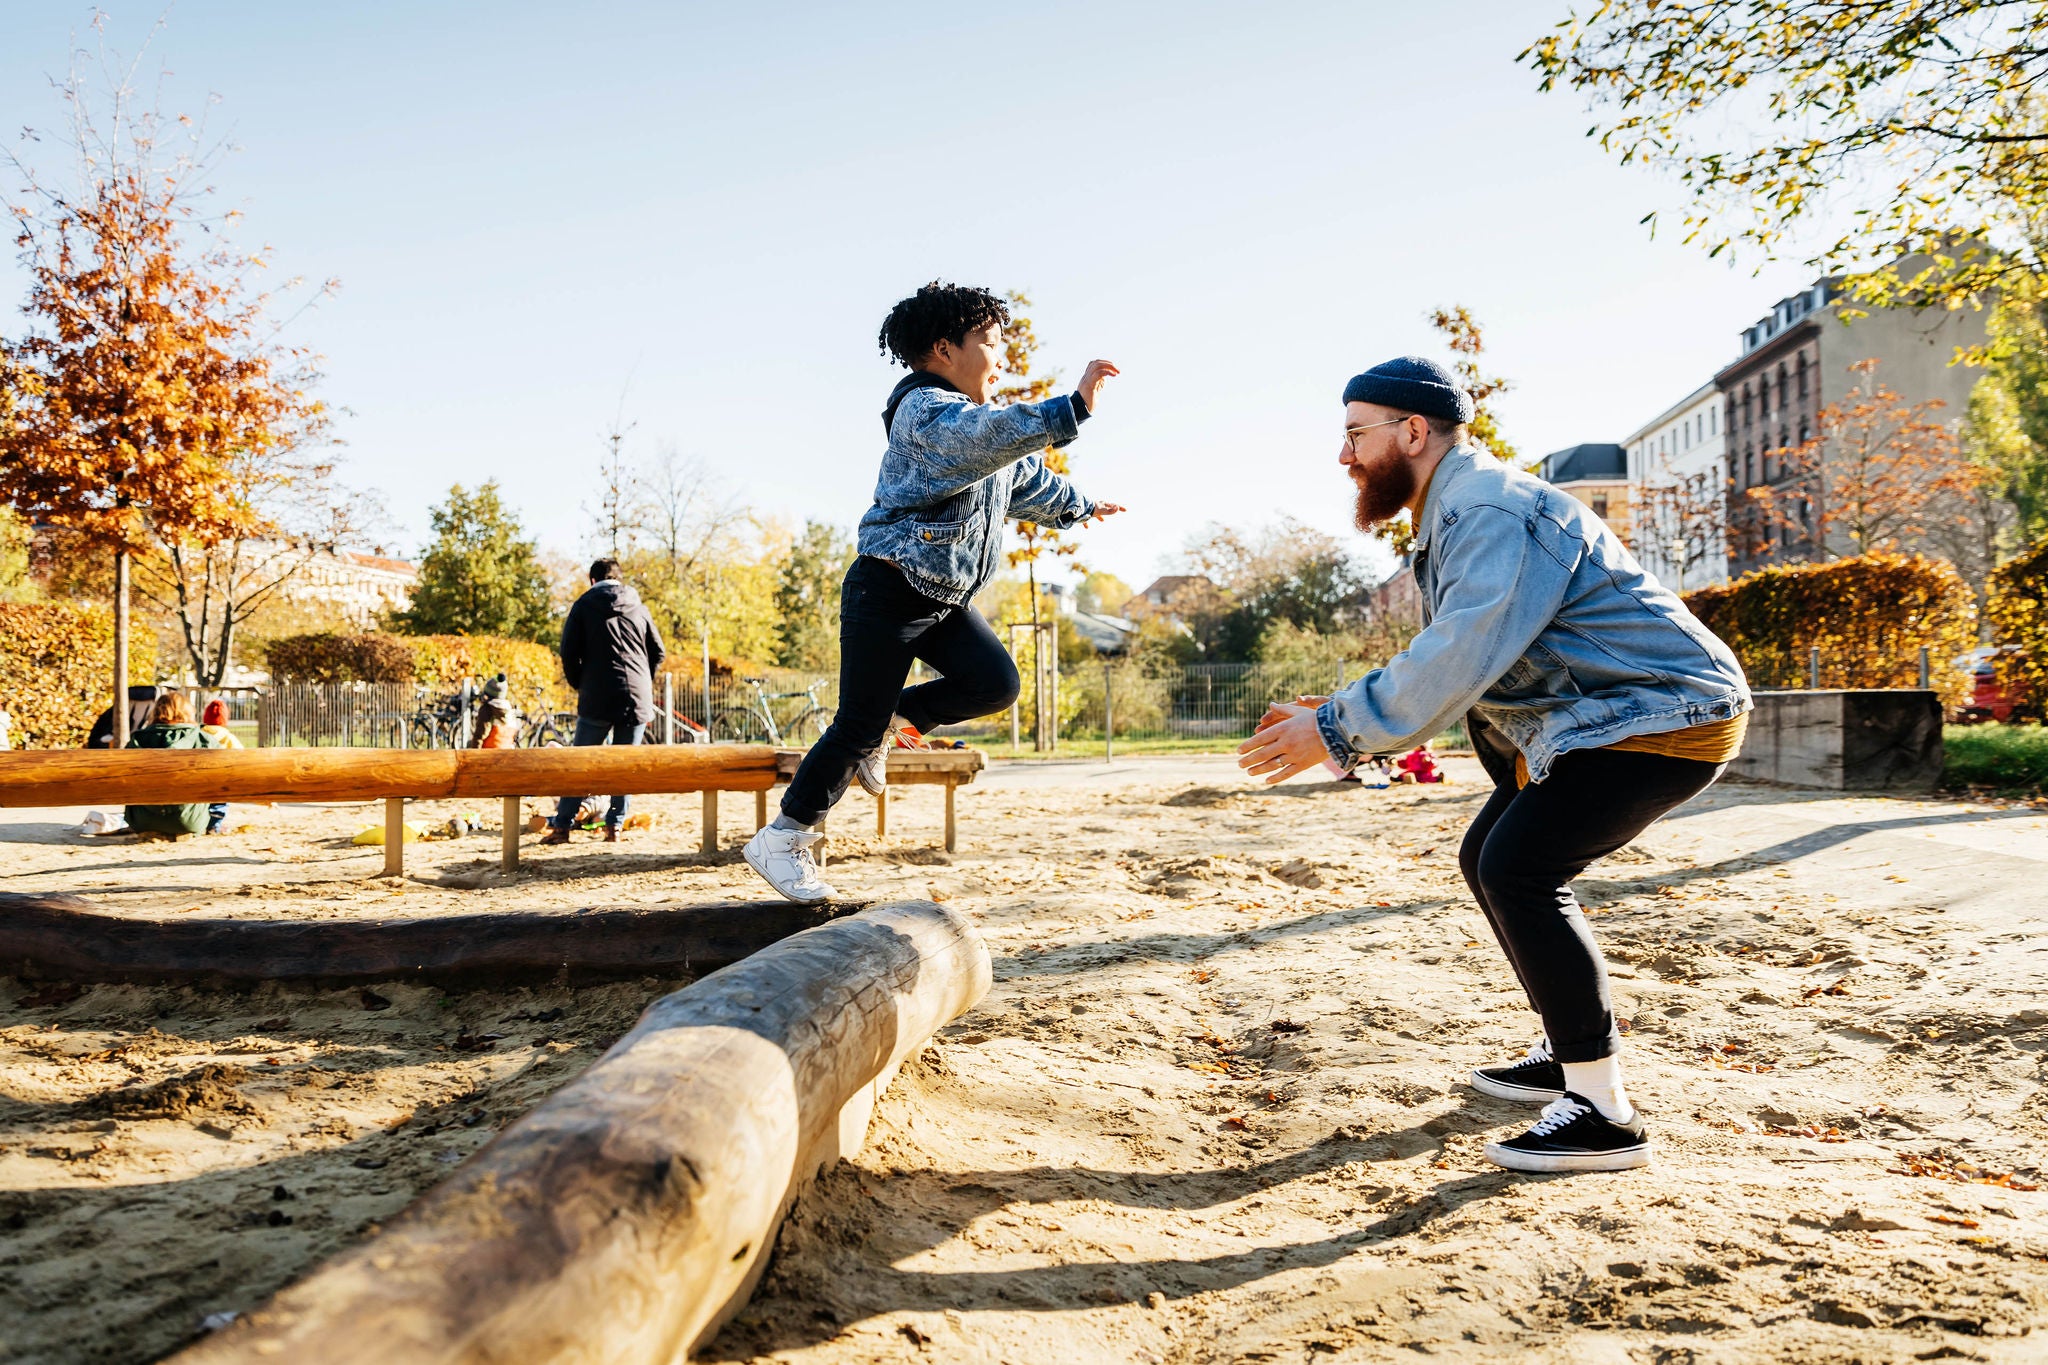 A young boy leaping into his fathers arms from a log while messing around in a playground at the park together.